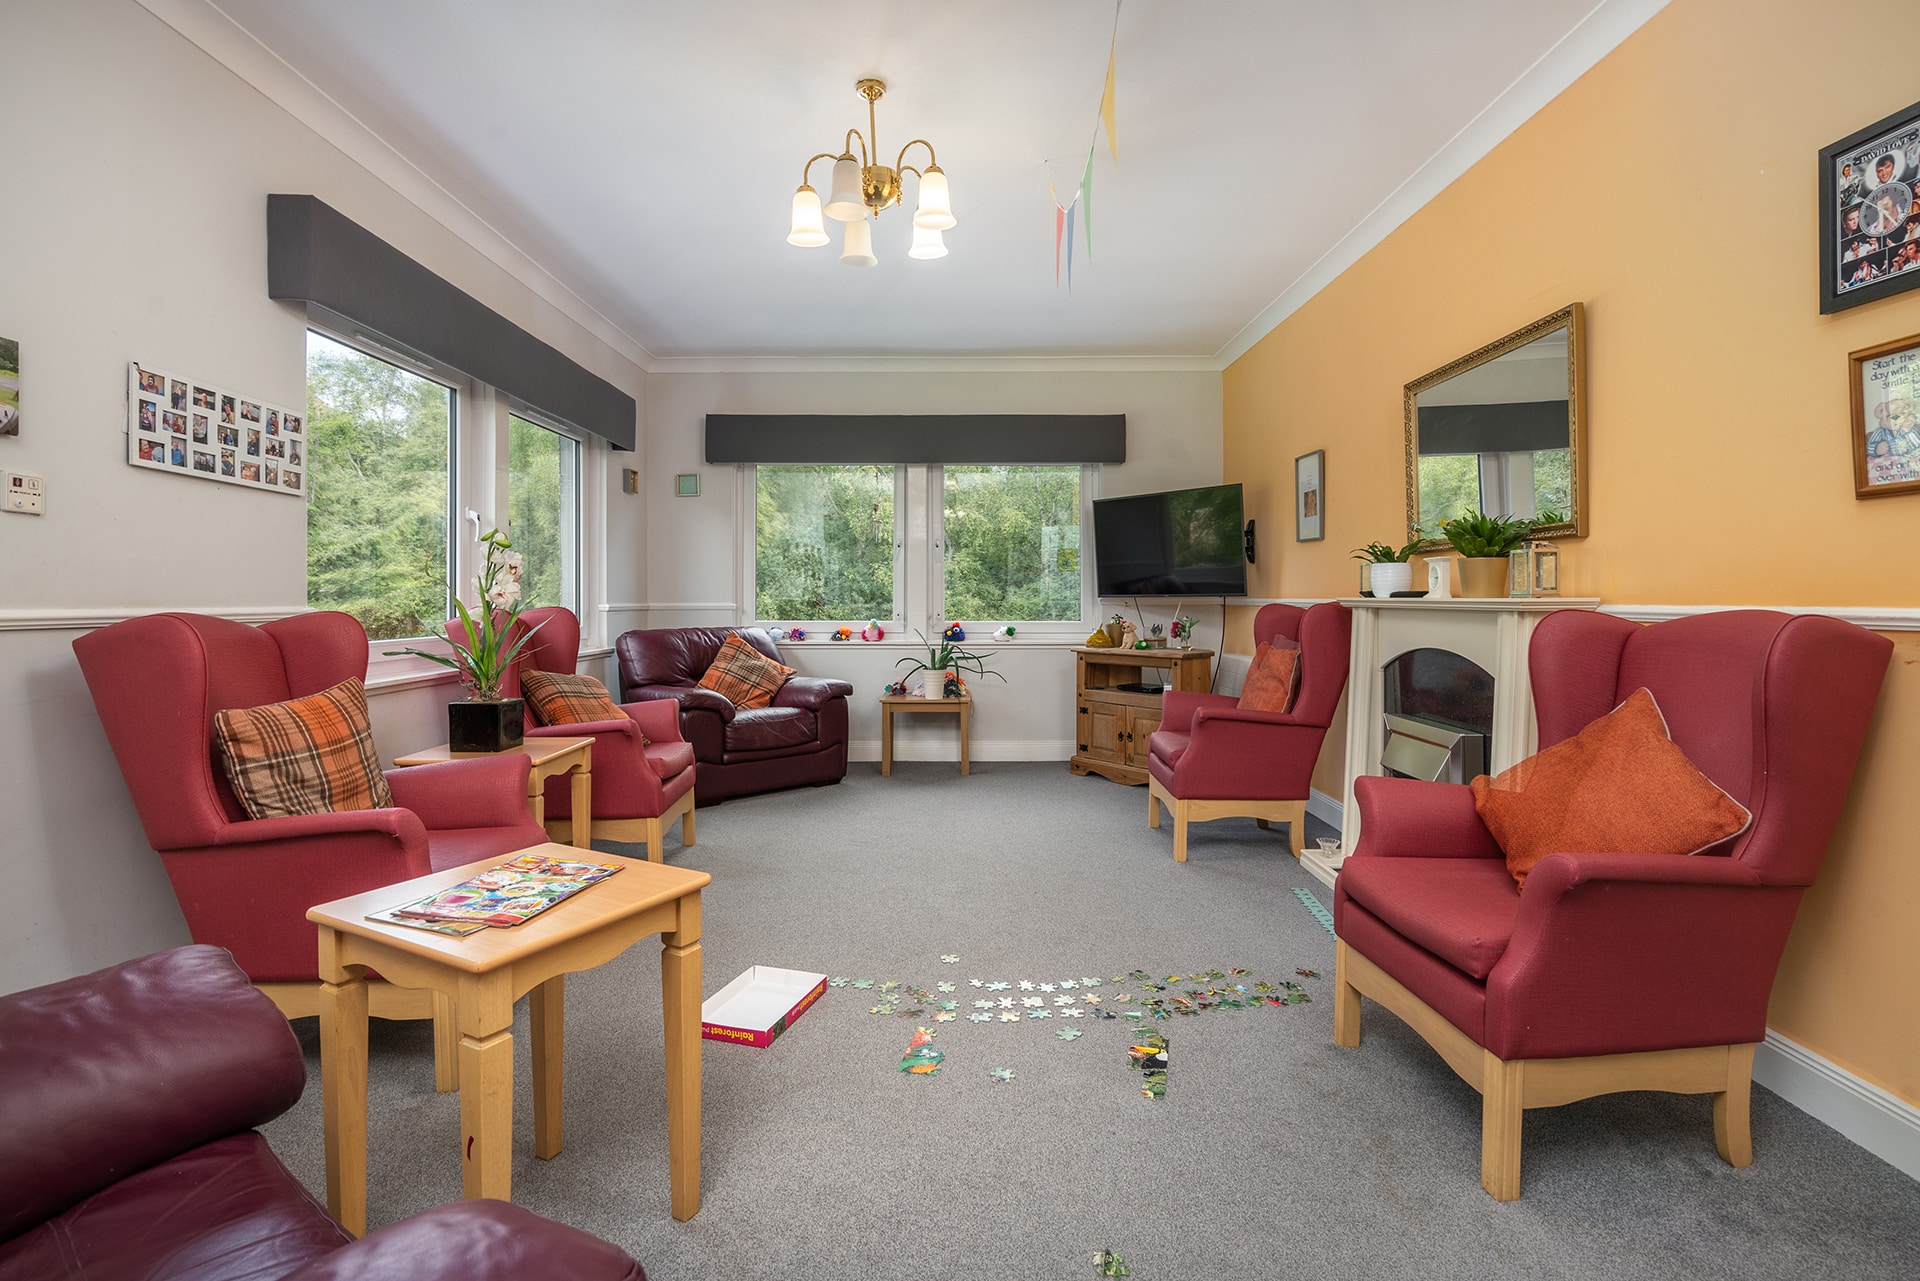 The spacious and personalised lounge situated on the Learning Disability Unit at Muirton House Care Home.